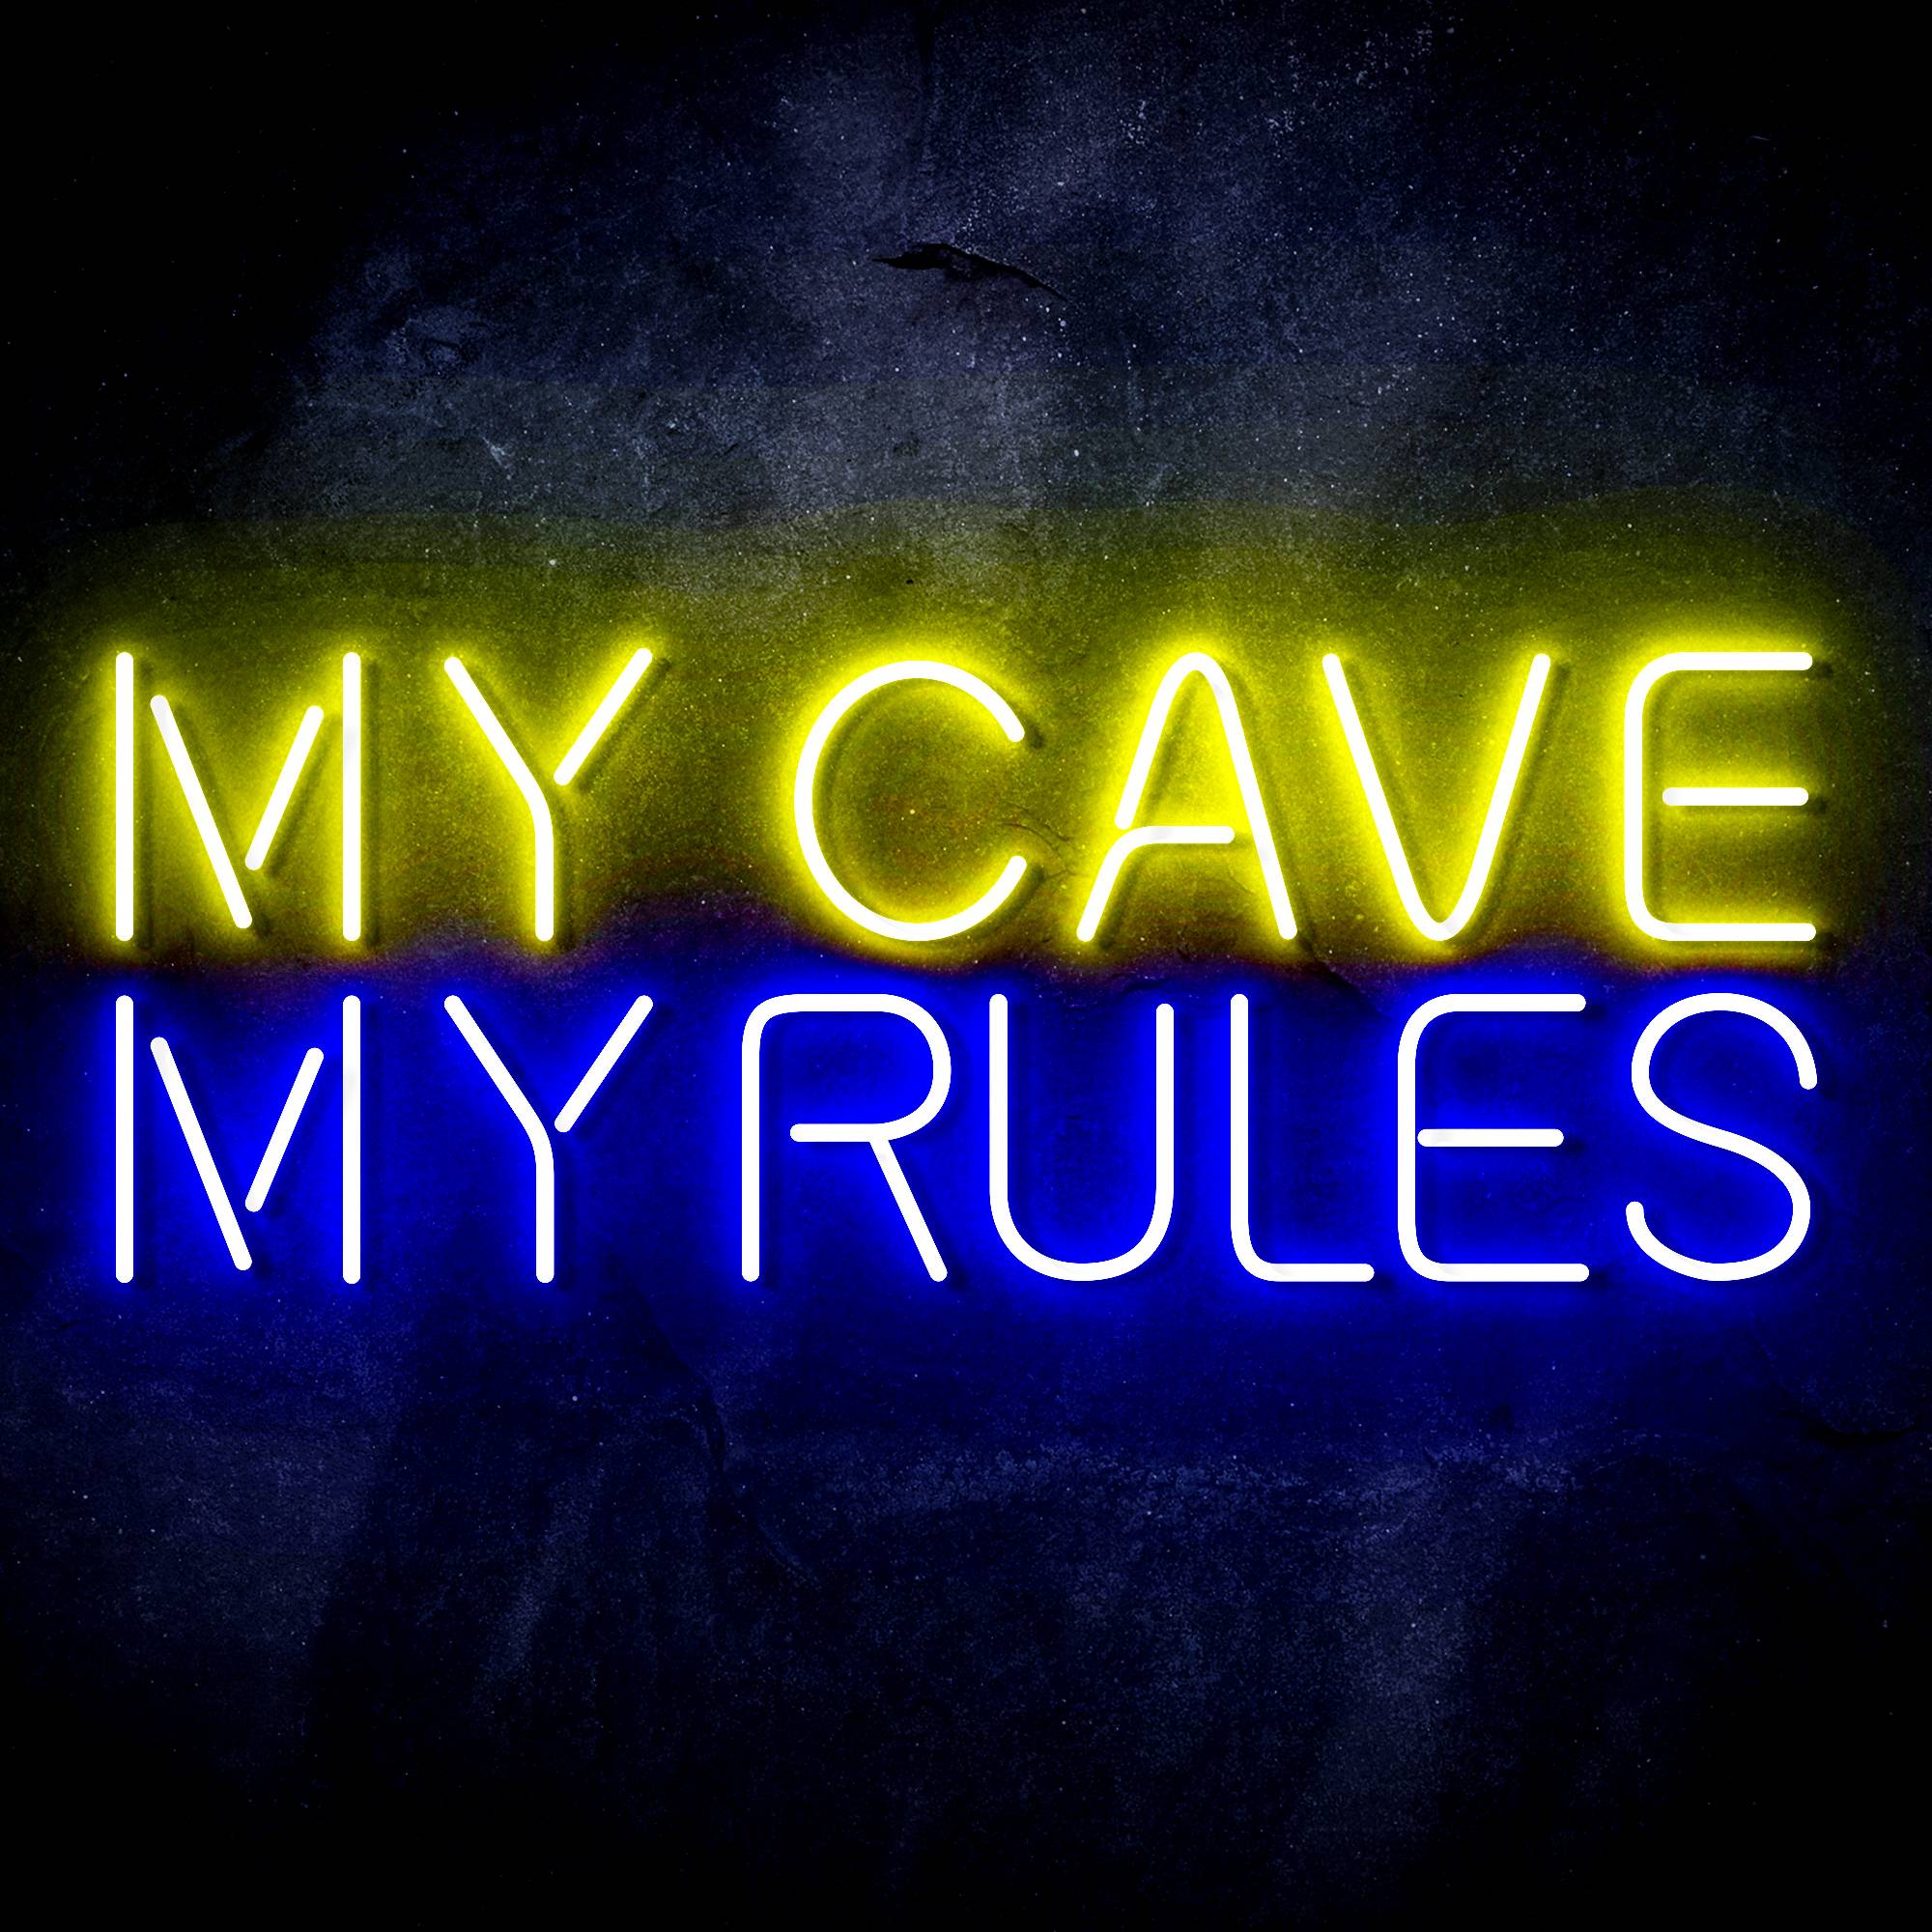 "MY CAVE MY RULES" Text Quote LED Neon Sign